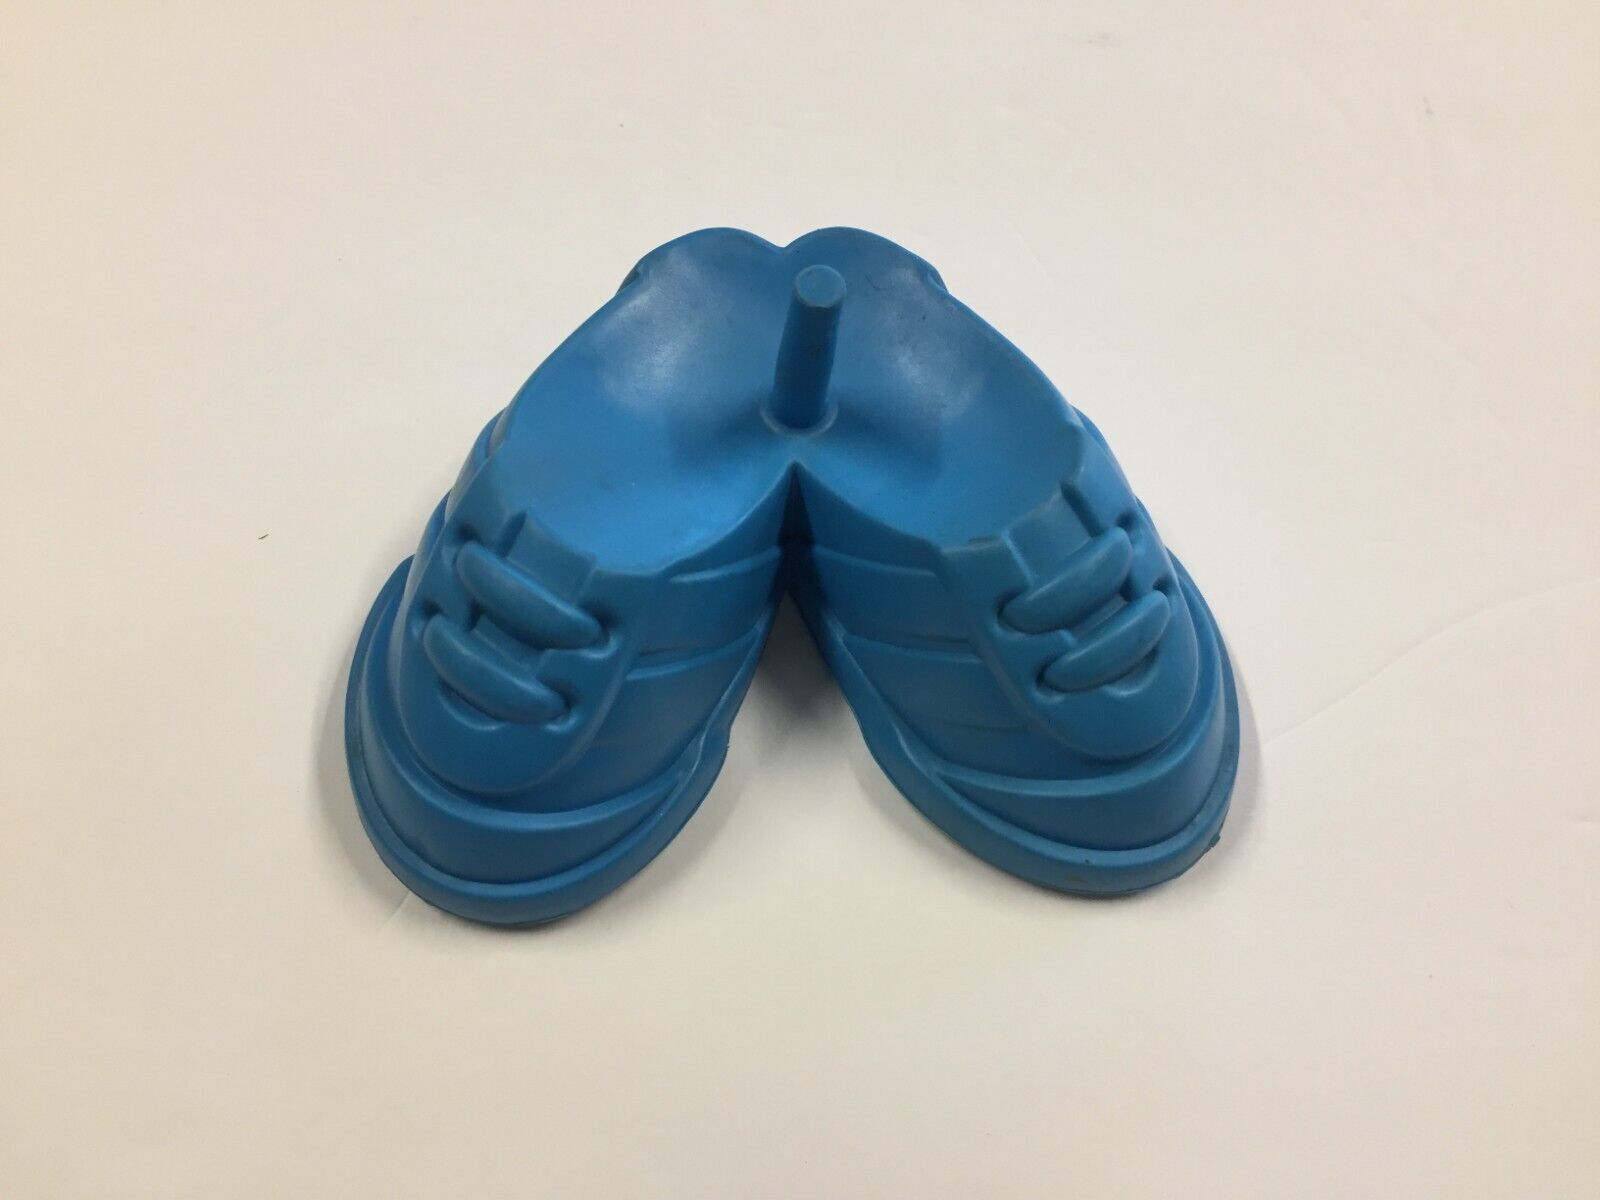 Mr and Mrs Potato Head Replacement Part Blue Tennis Shoes Sneakers #2 - $2.89